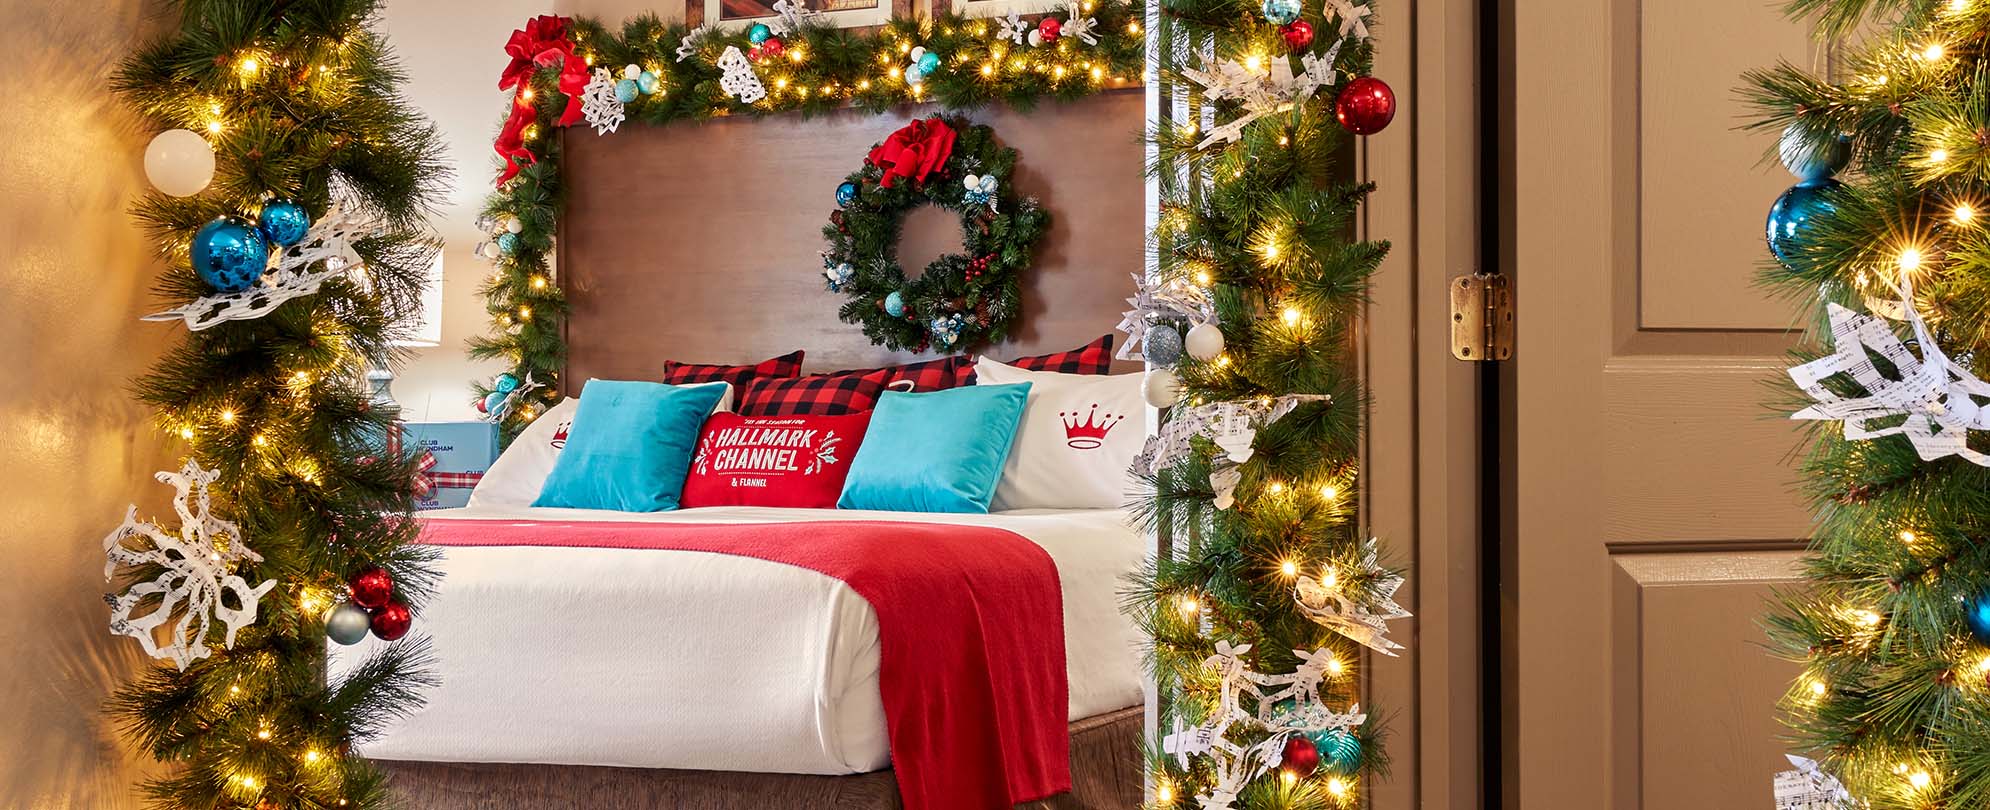 Christmas garland hanging from the doorway and bed frame of a king bed inside the Hallmark Channel Countdown to Christmas Holiday suite in Nashville, TN.